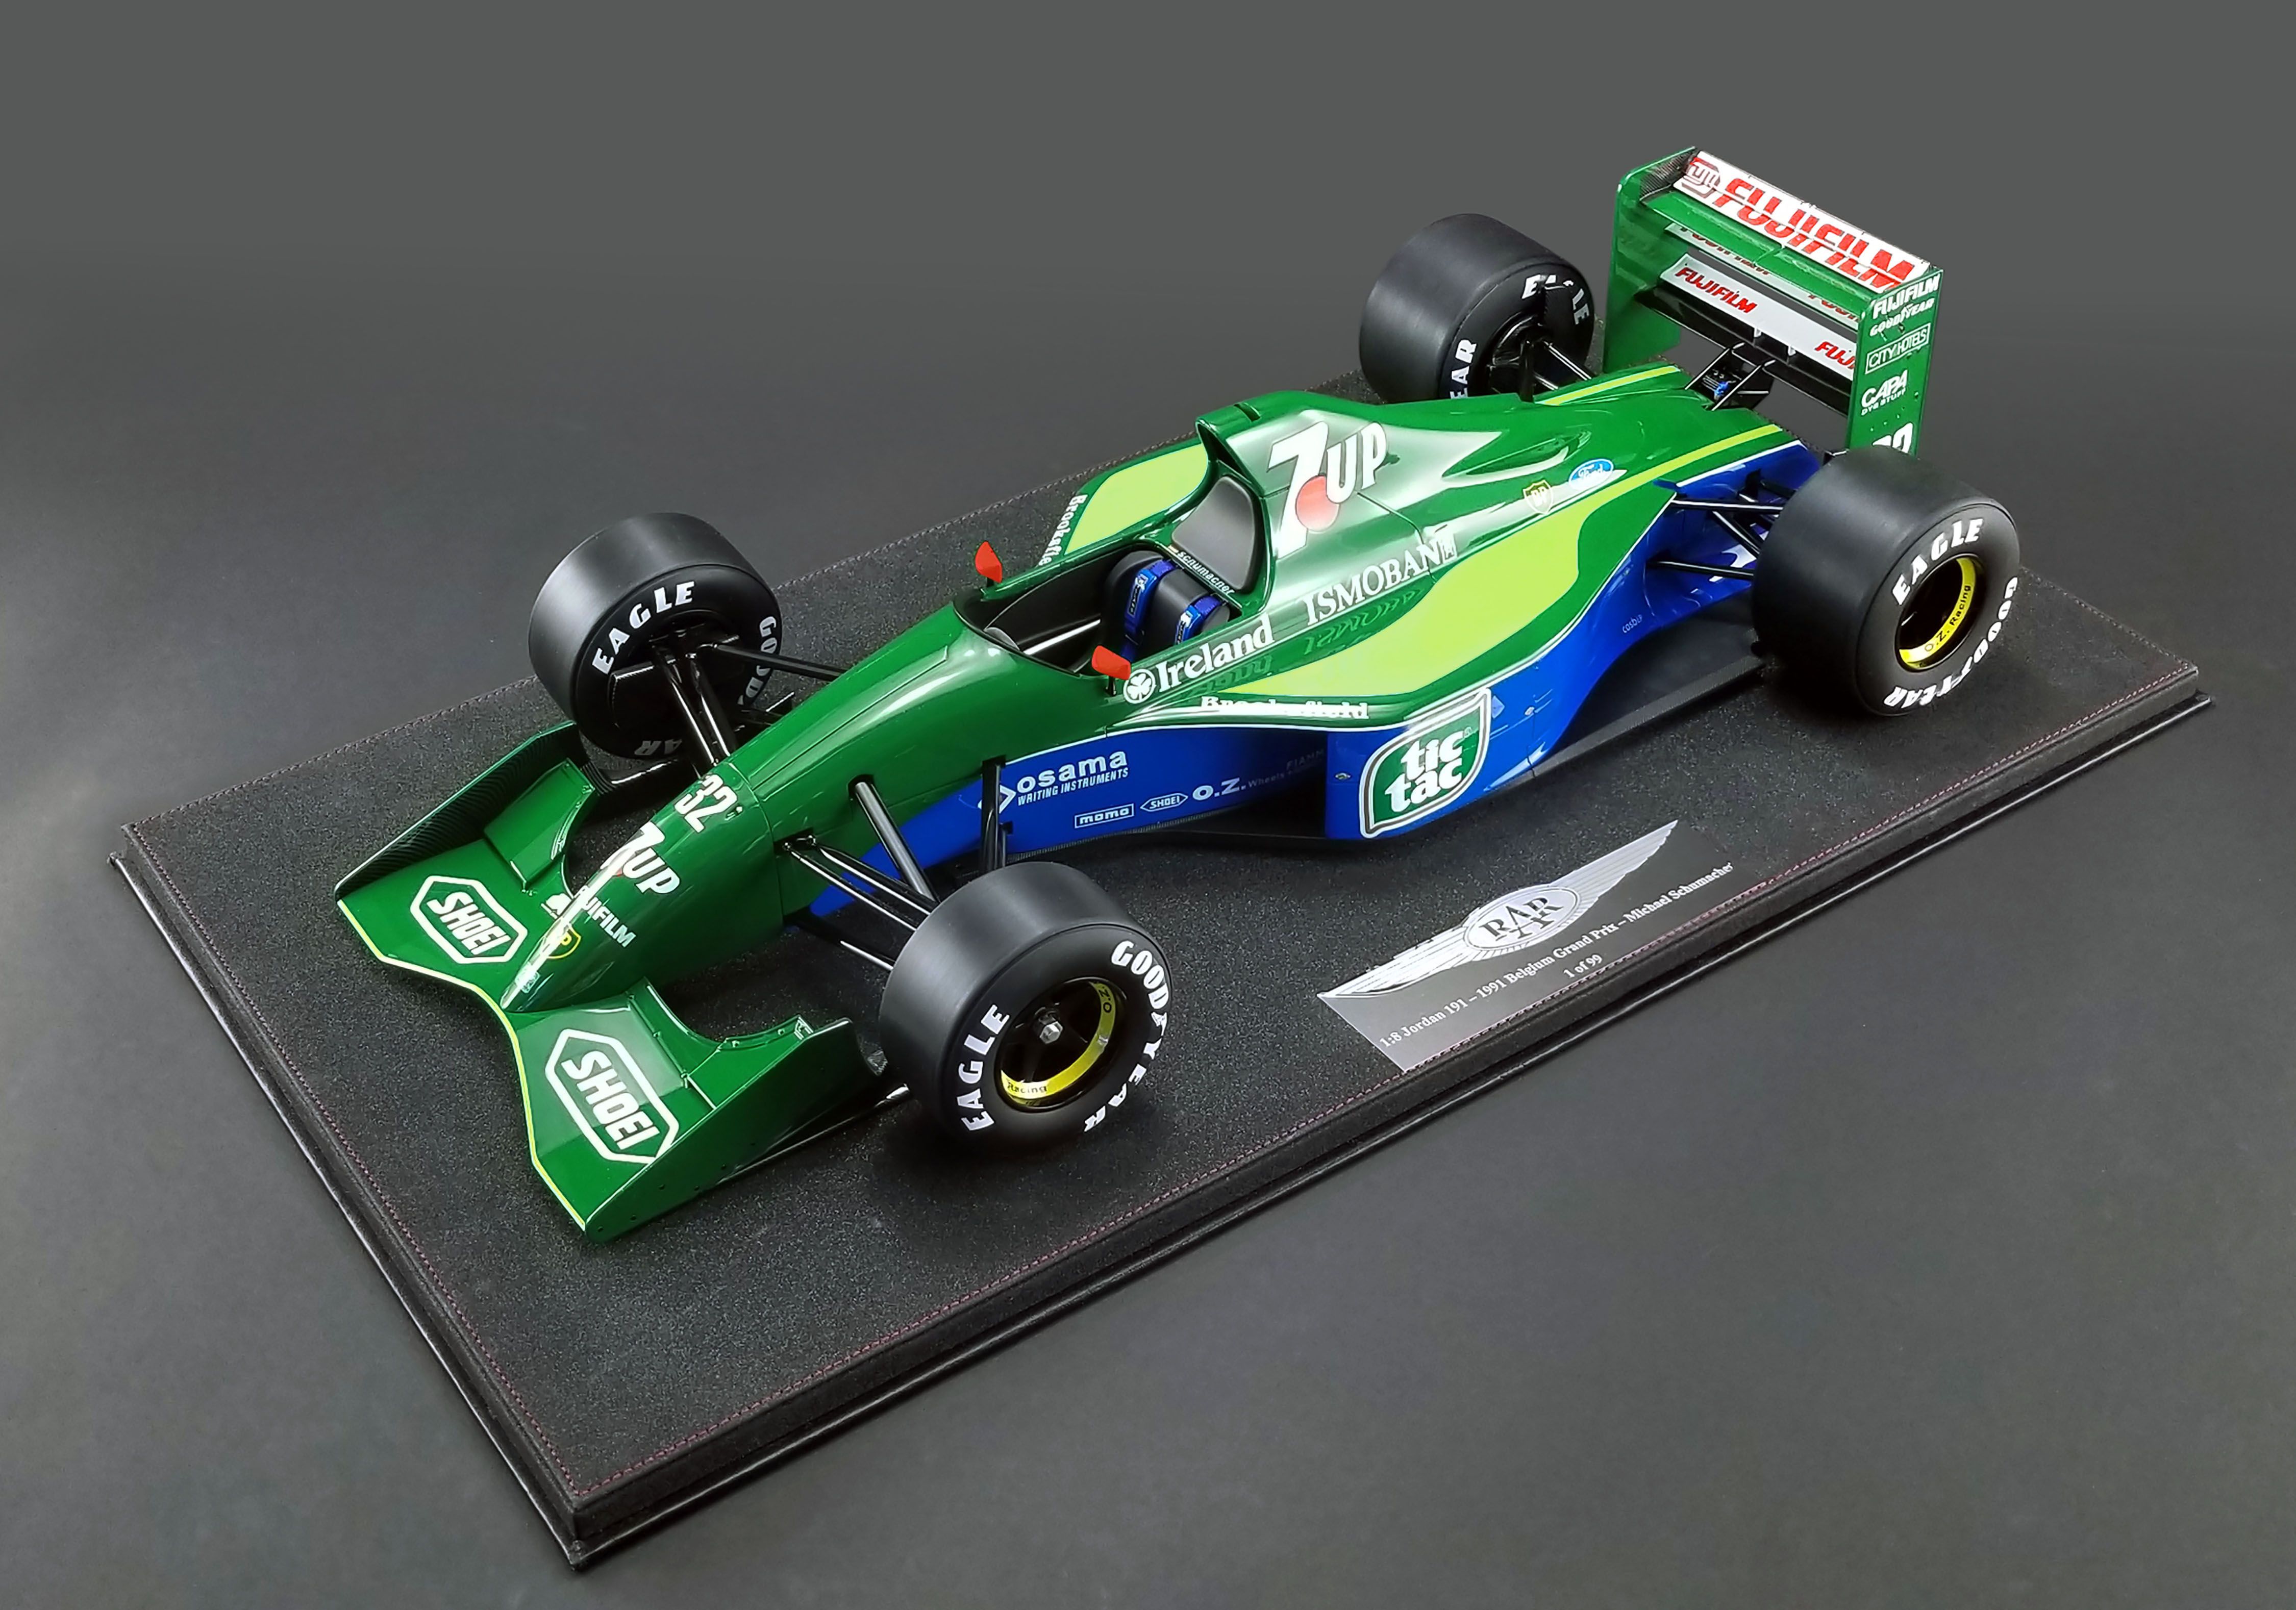 Check out this $4,495 Scale Model of the #32 Jordan 191 Formula One Car